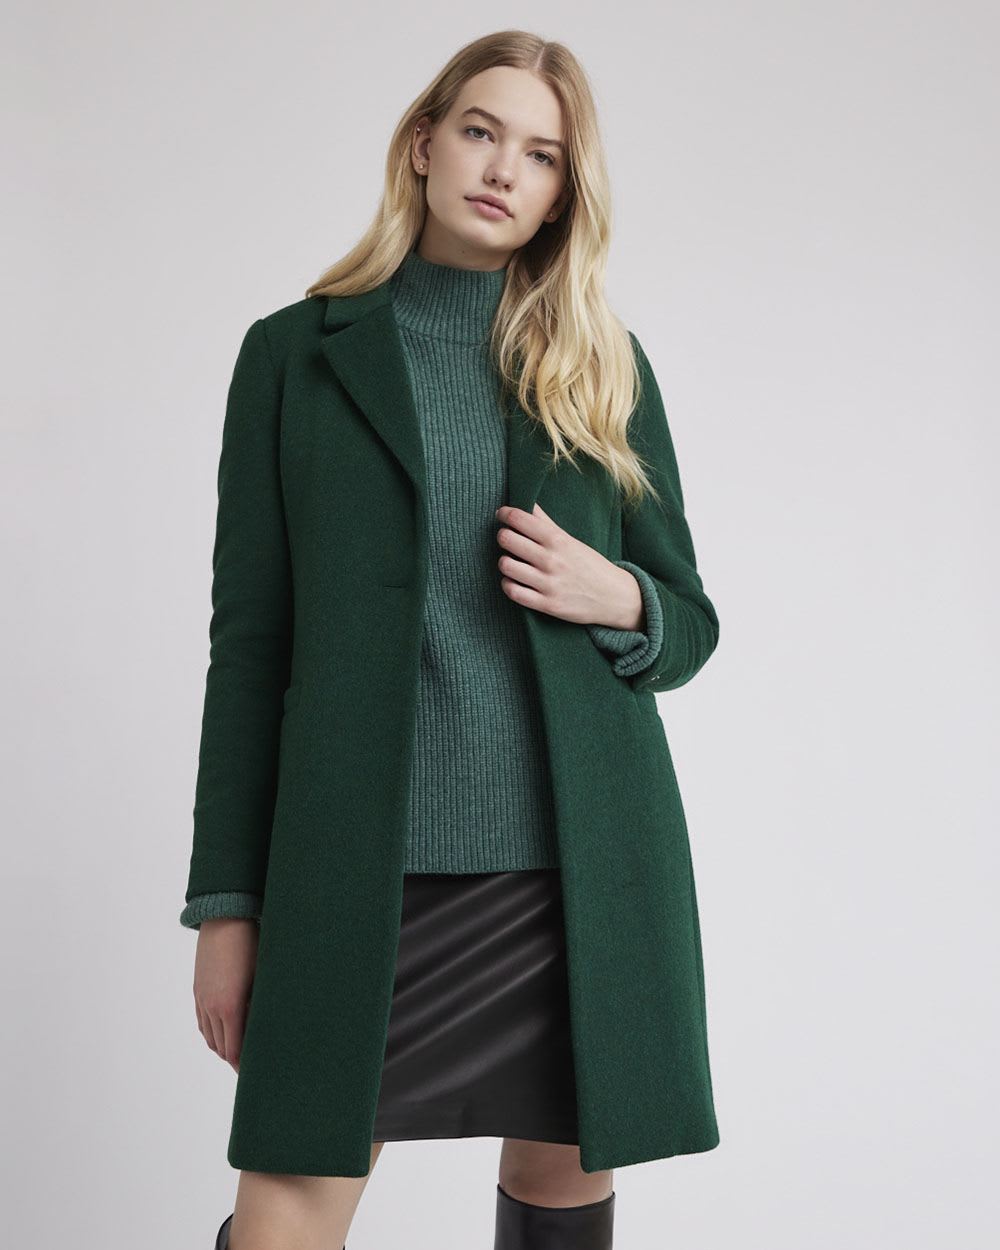 Classic One-Button Wool Coat | RW&CO.